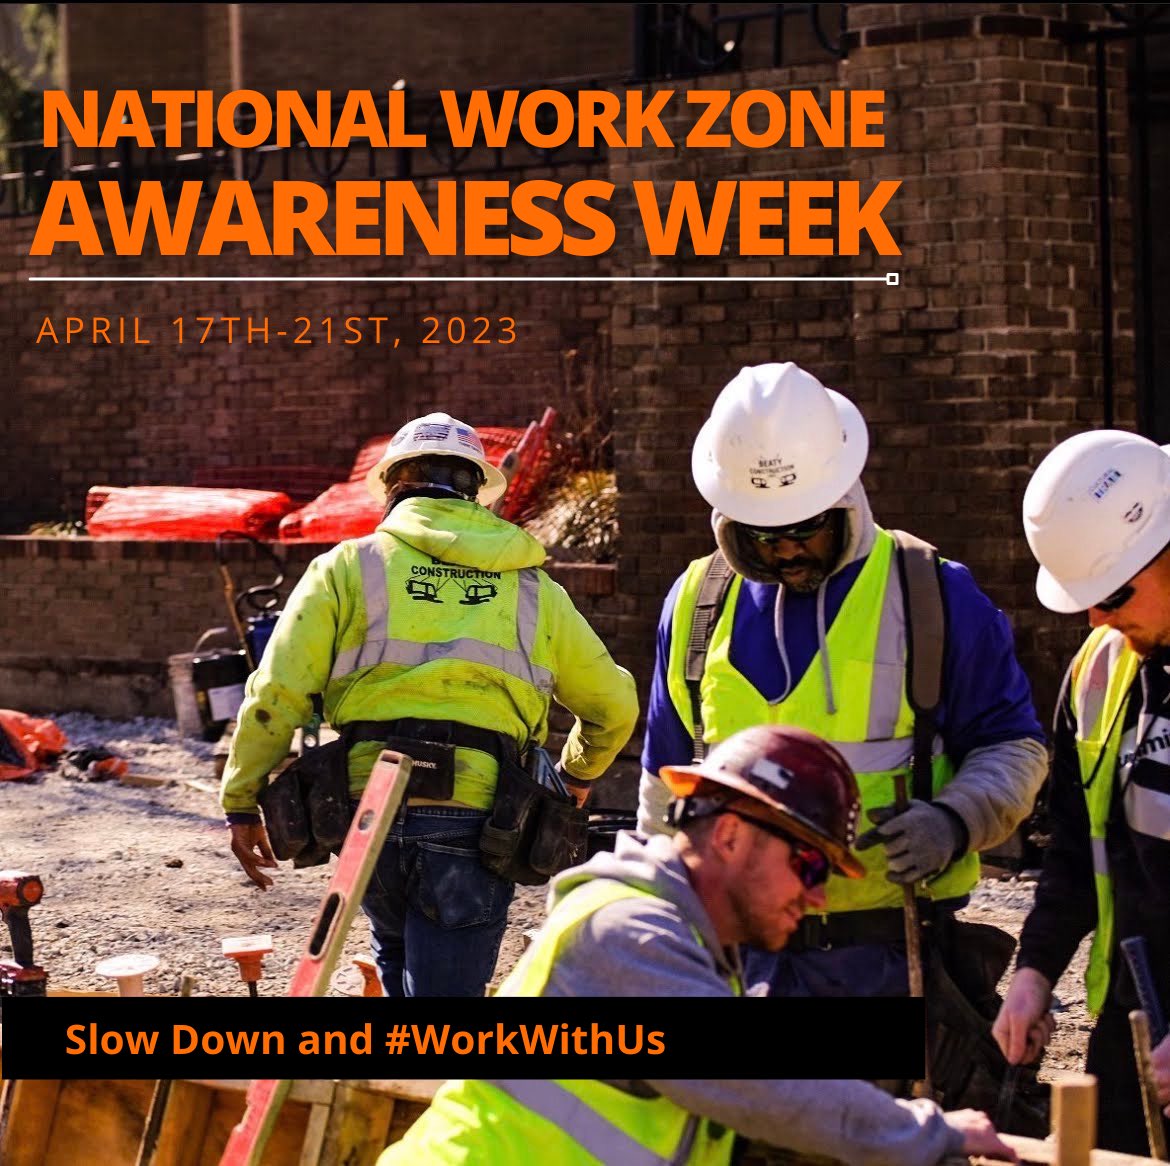 #NationalWorkZoneAwarenessWeek is a time to remind drivers to slow down and use caution when driving through construction zones. At @beaty_inc, we are a family and want to make sure all of our crew members get home safe at night. #WorkWithUs to keep work zones a safe place 🧡